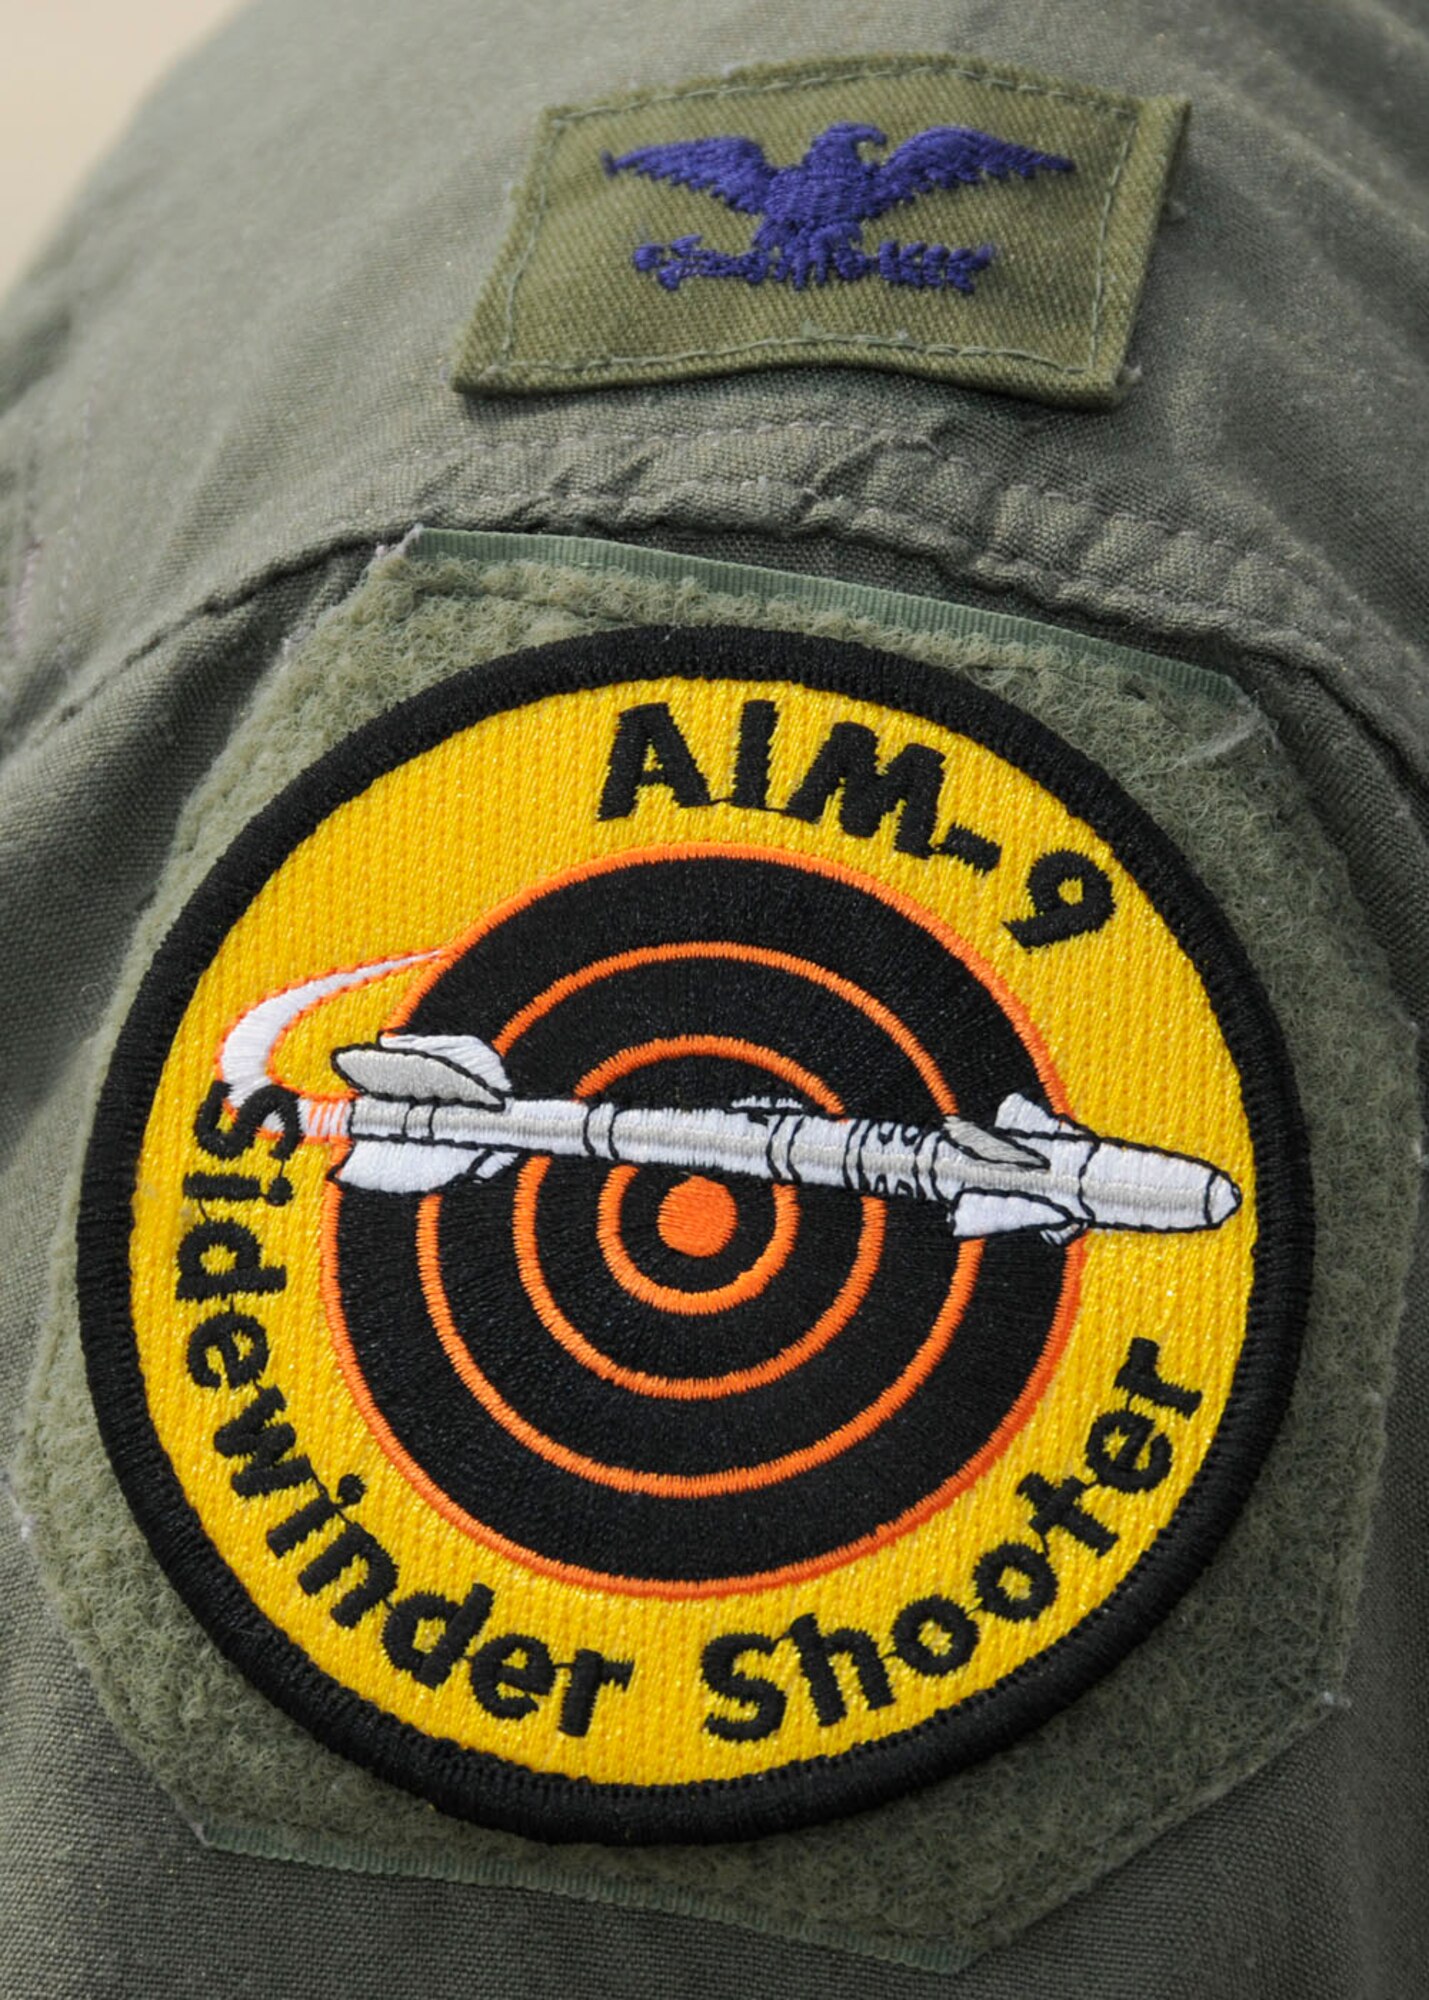 A newly achieved AIM-9 Sidewinder Shooter patch worn my Col. Kenneth Lambrich from the 104th Fighter Wing, Massachusetts Air National Guard as he watches maintenance crews work on the F-15 at Tyndall AFB, Florida as they participate in the Weapons System Evaluation Program (WSEP), known as Combat Archer, on April 19, 2011. This training is important for the ground crews to test their maintenance systems and processes while loading live munitions on the F-15 eagle, as well as critical live war fighting training for the F-15 pilots to employ air-to-air missiles against real world targets.  (U.S.A.F. photograph by Senior Master Sgt. Robert J. Sabonis)